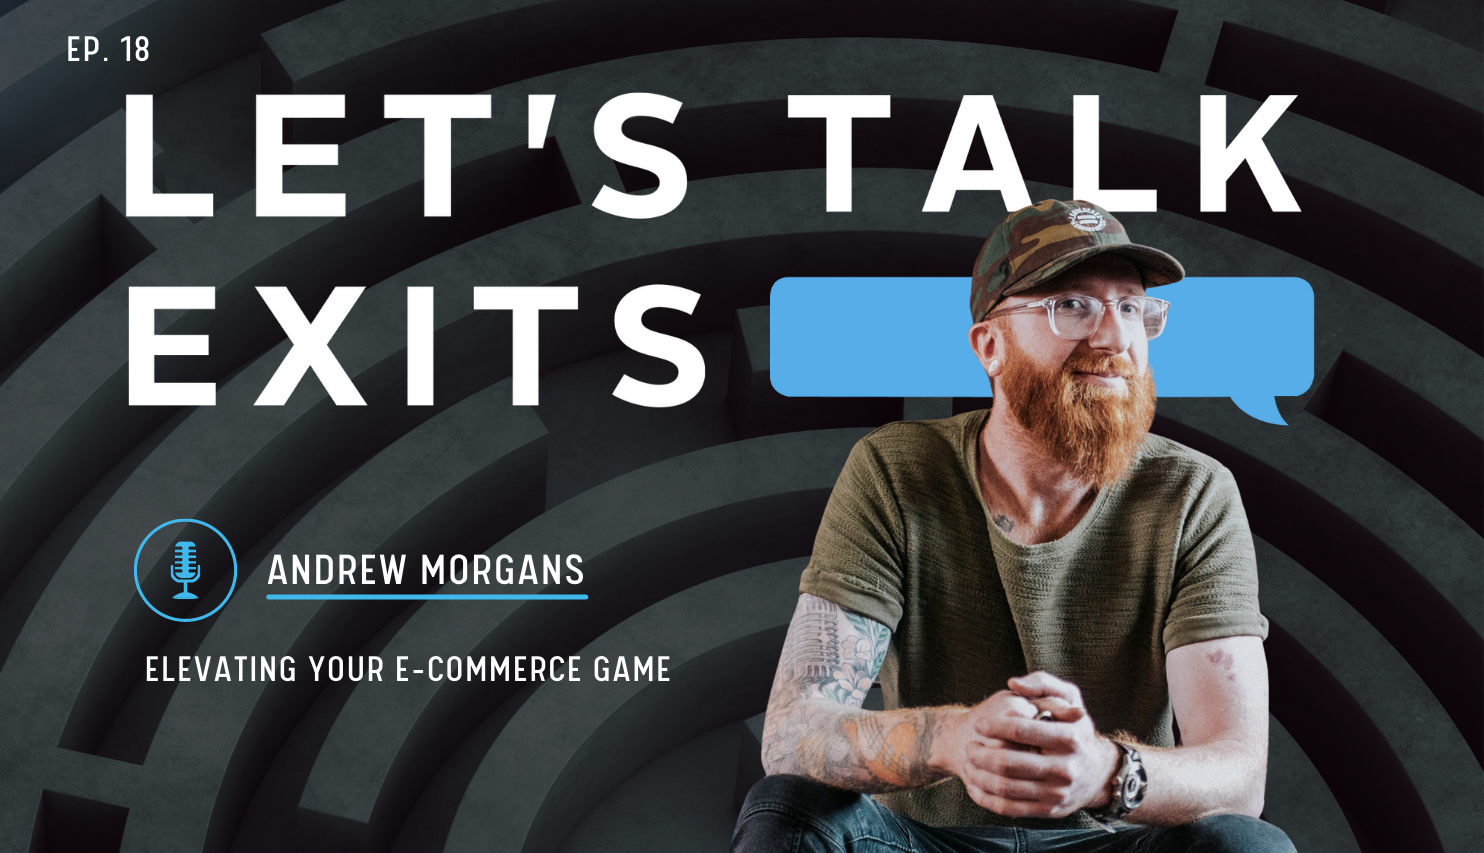 Elevating Your eCommerce Game with Andrew Morgans